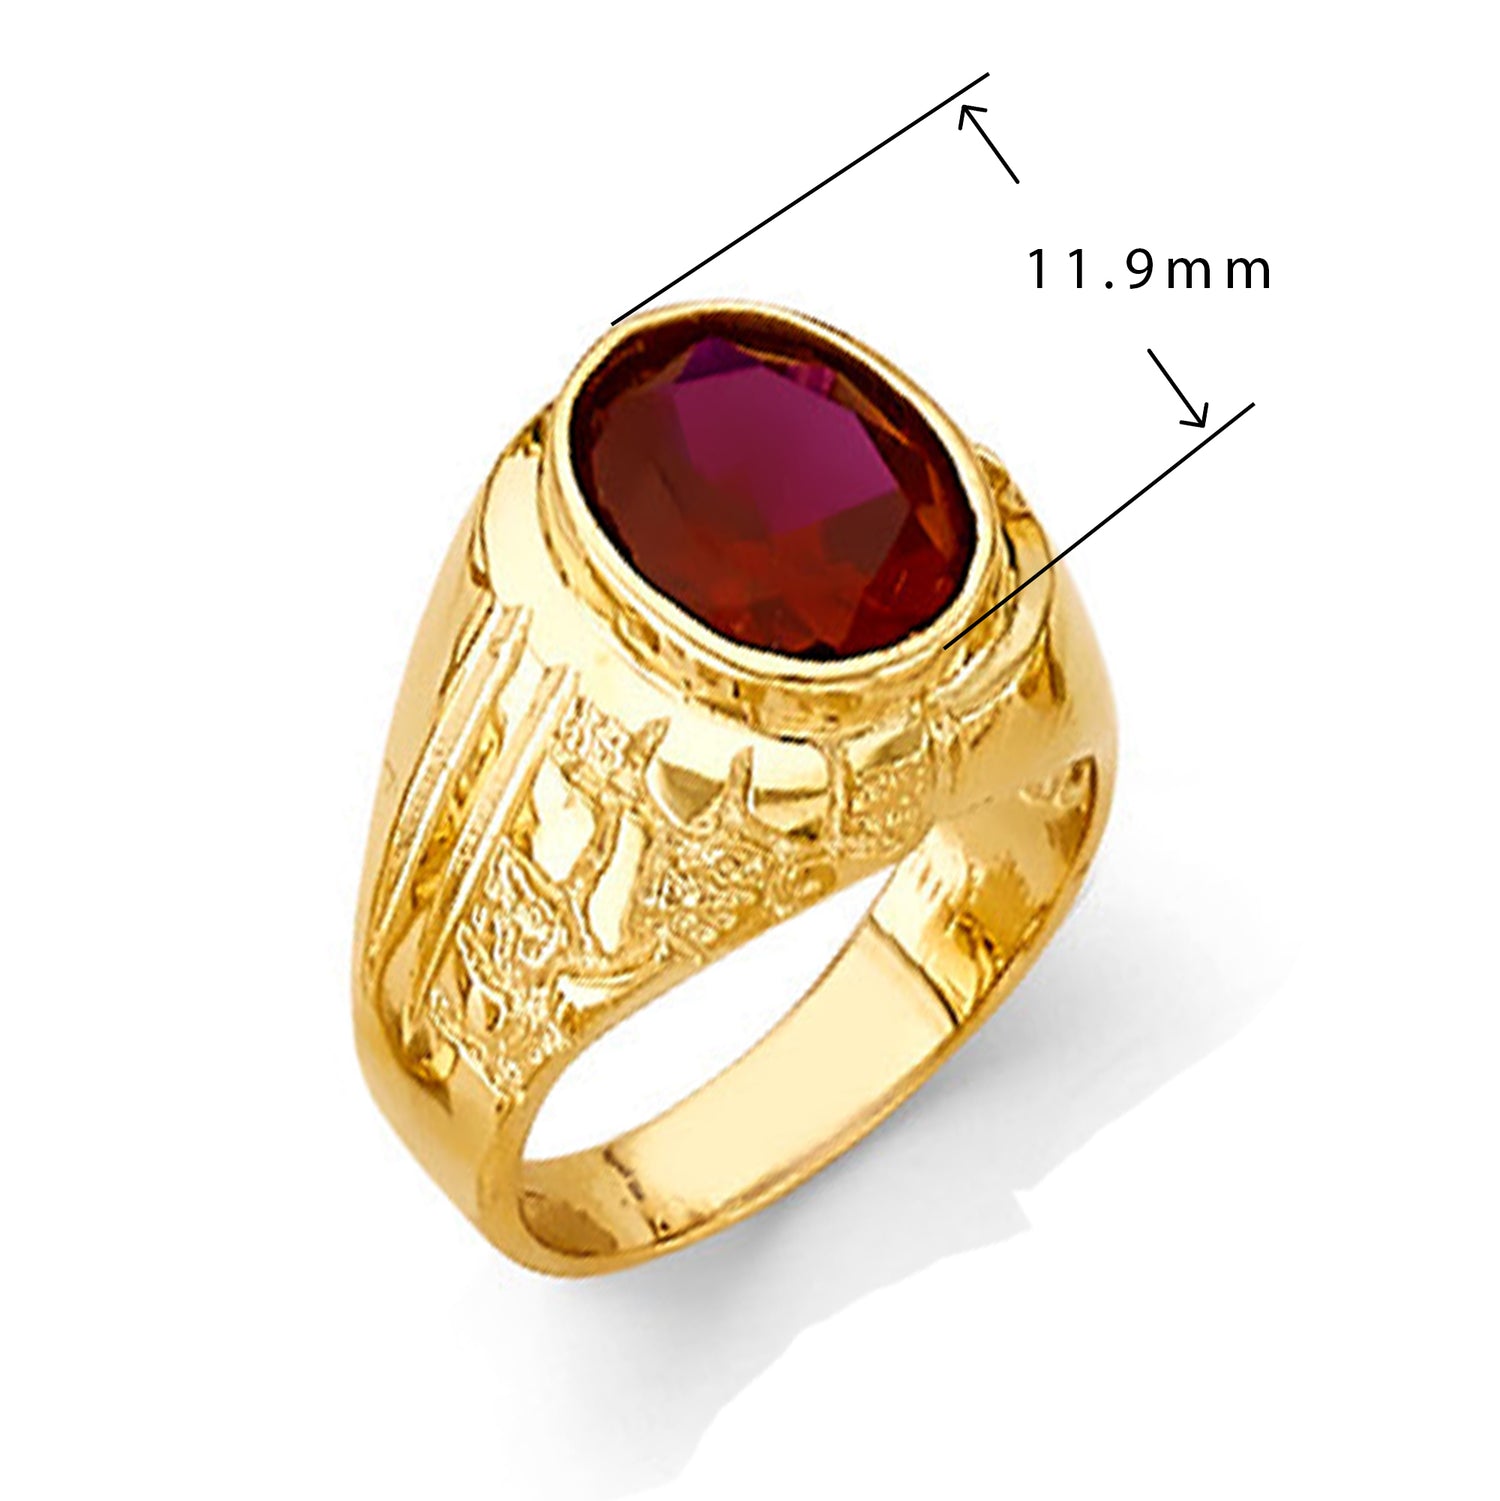 Oval Garnet Ring in Solid Gold with Measurement